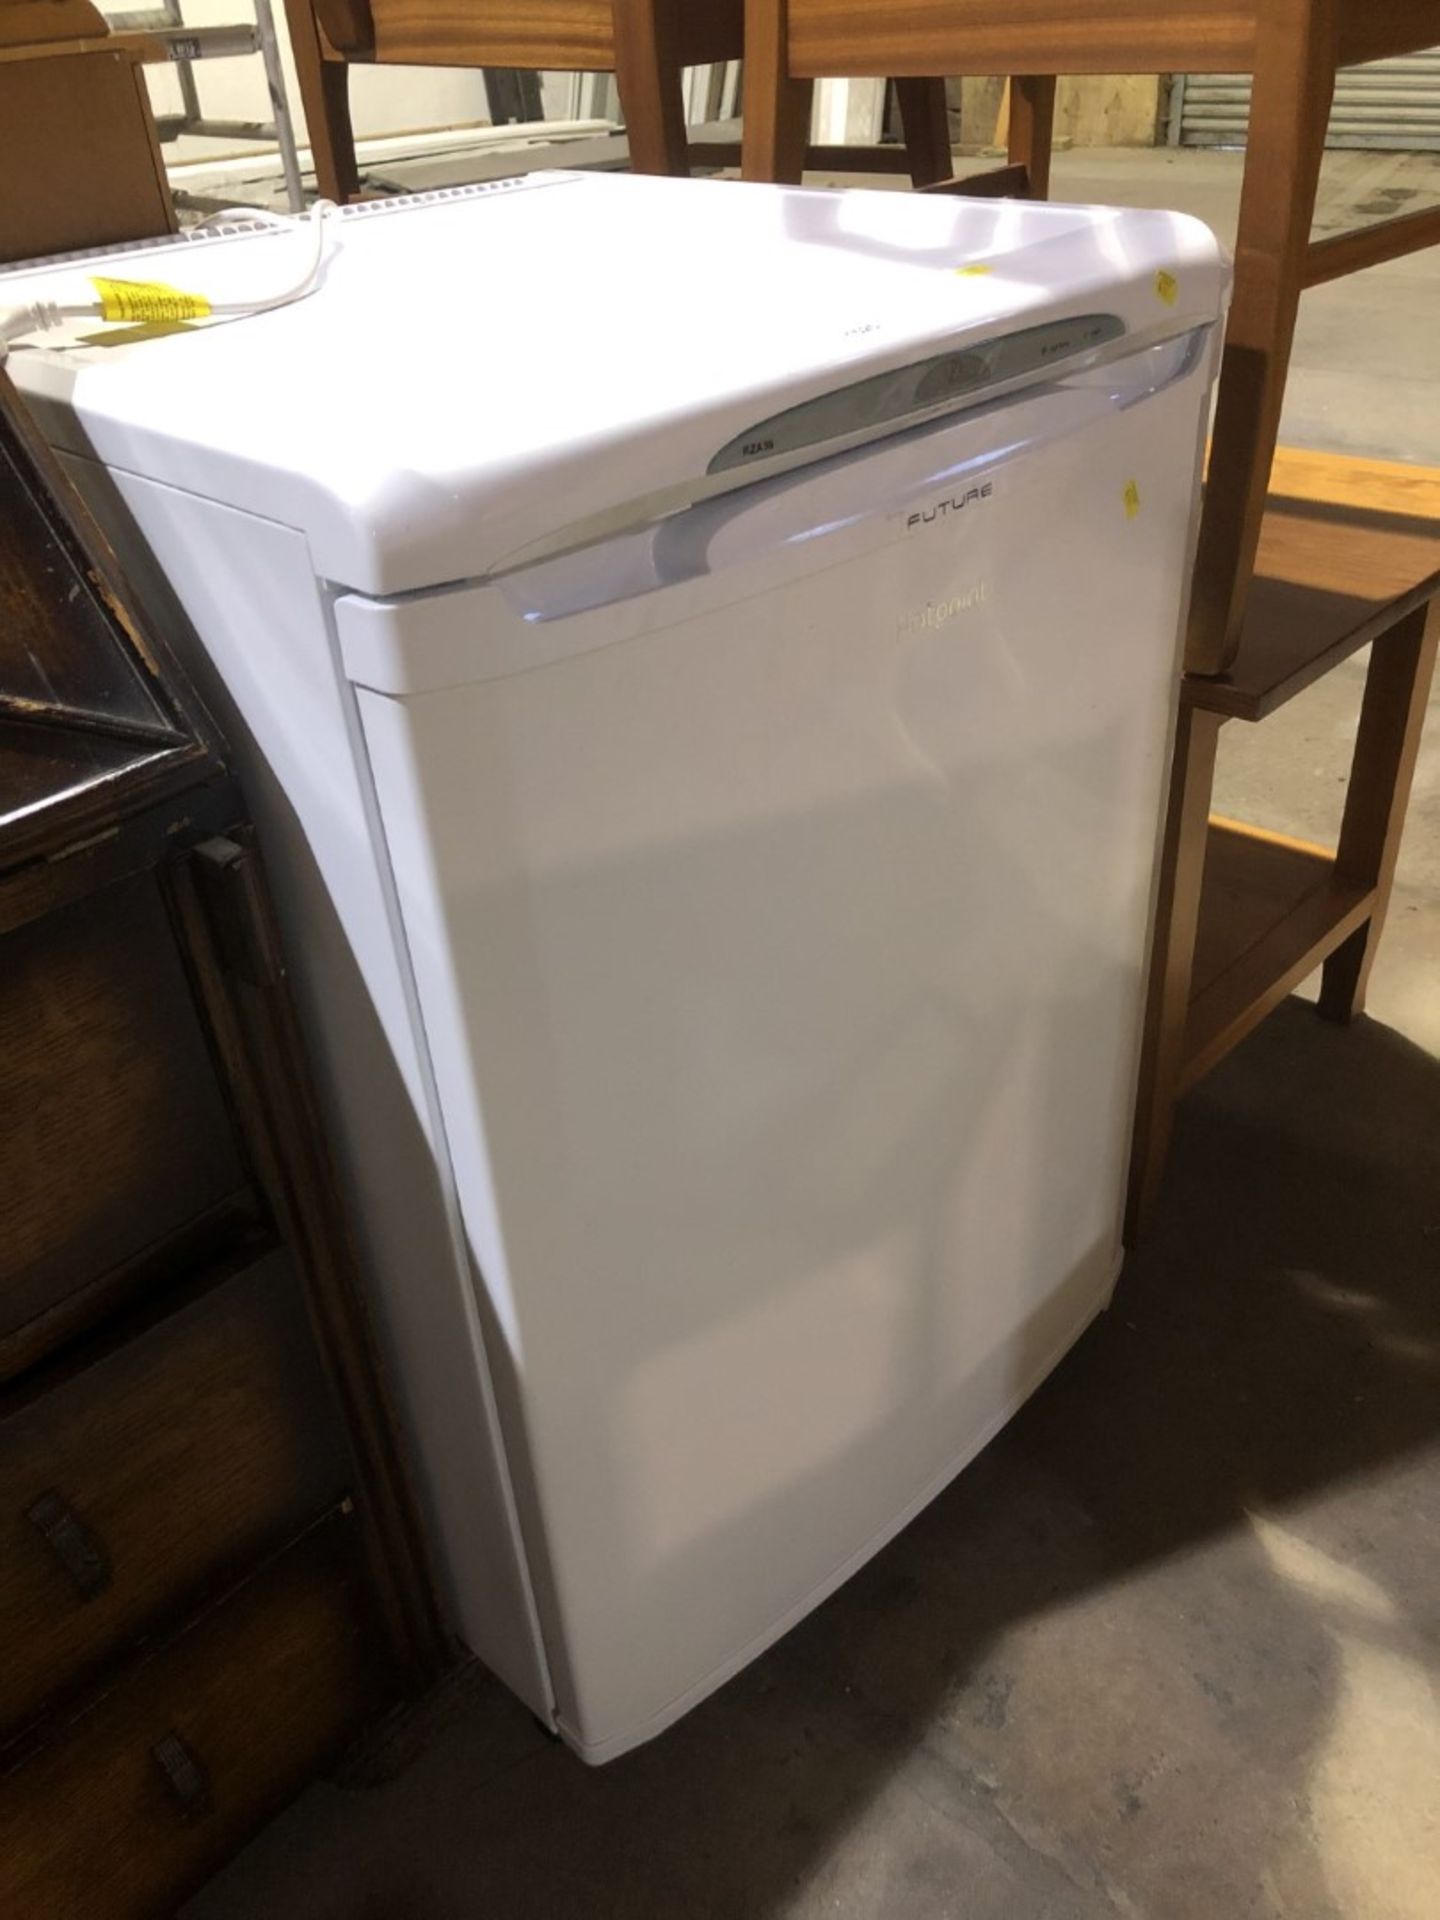 A Hotpoint Future freezer. This lot is available to view Tuesday 15th 10am to 4pm at our temporary o